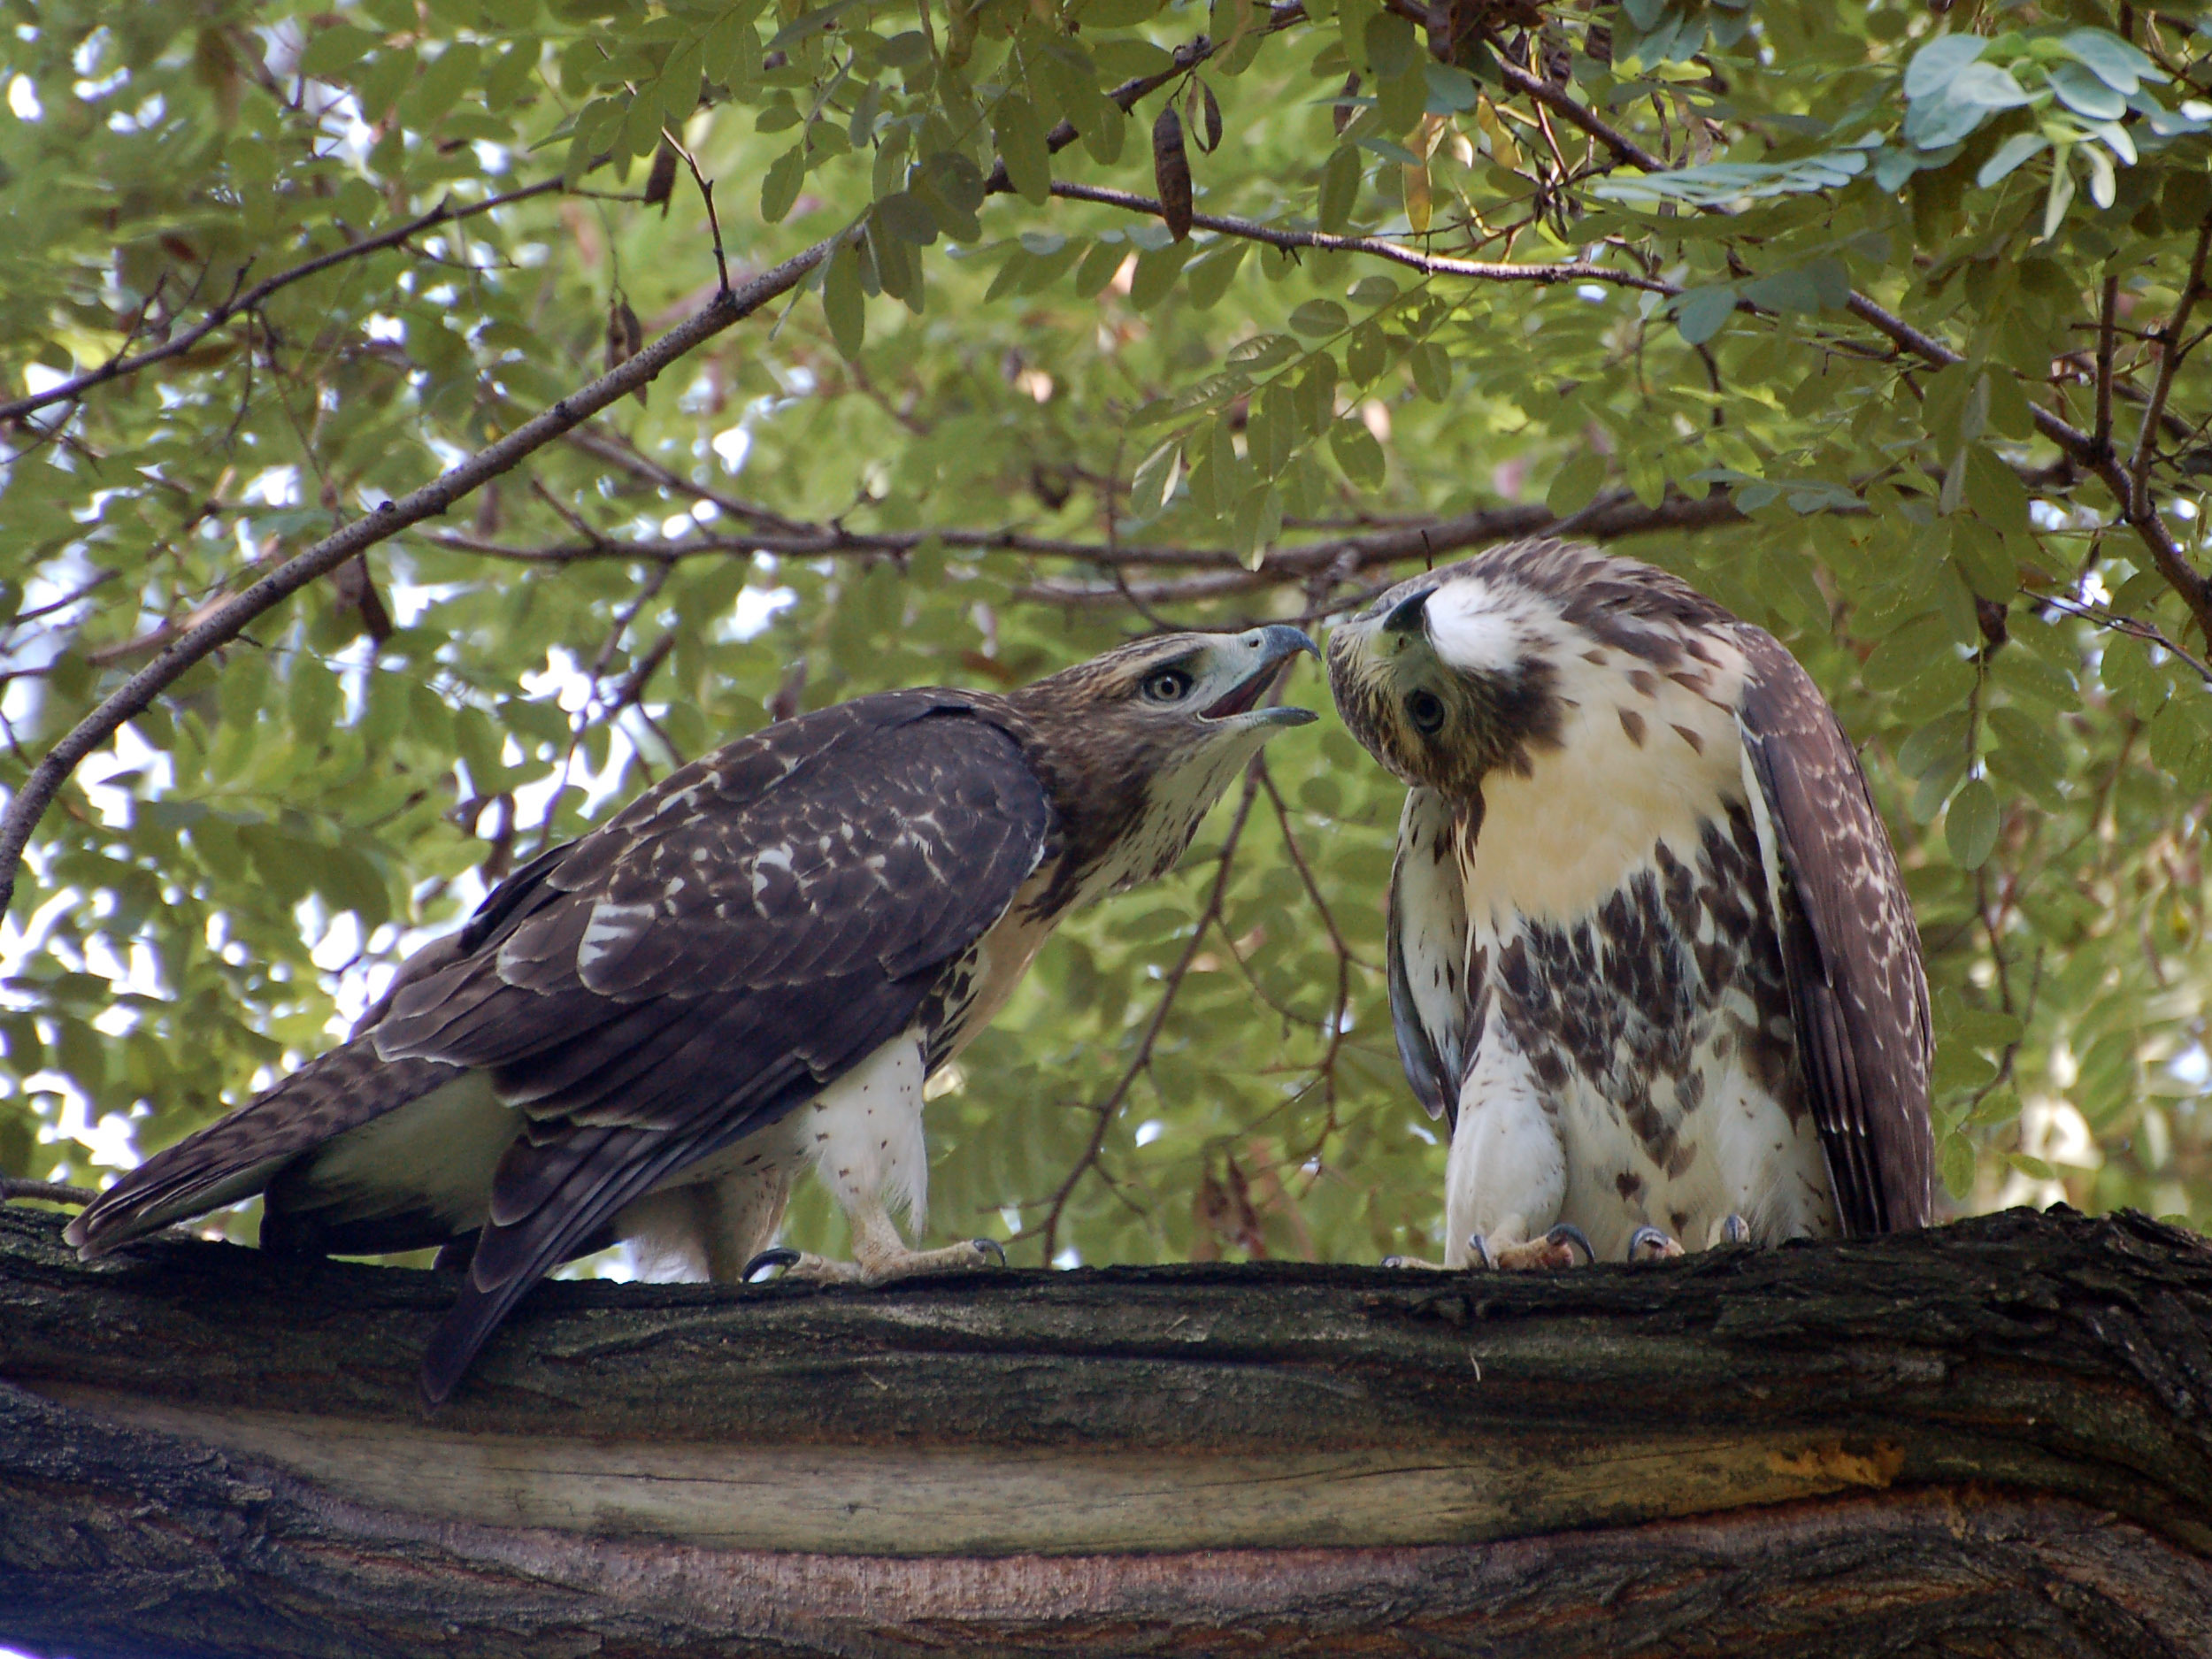 Two young Red-tailed Hawks in Morningside Park. Photo: Robert/CC BY-NC-ND 2.0